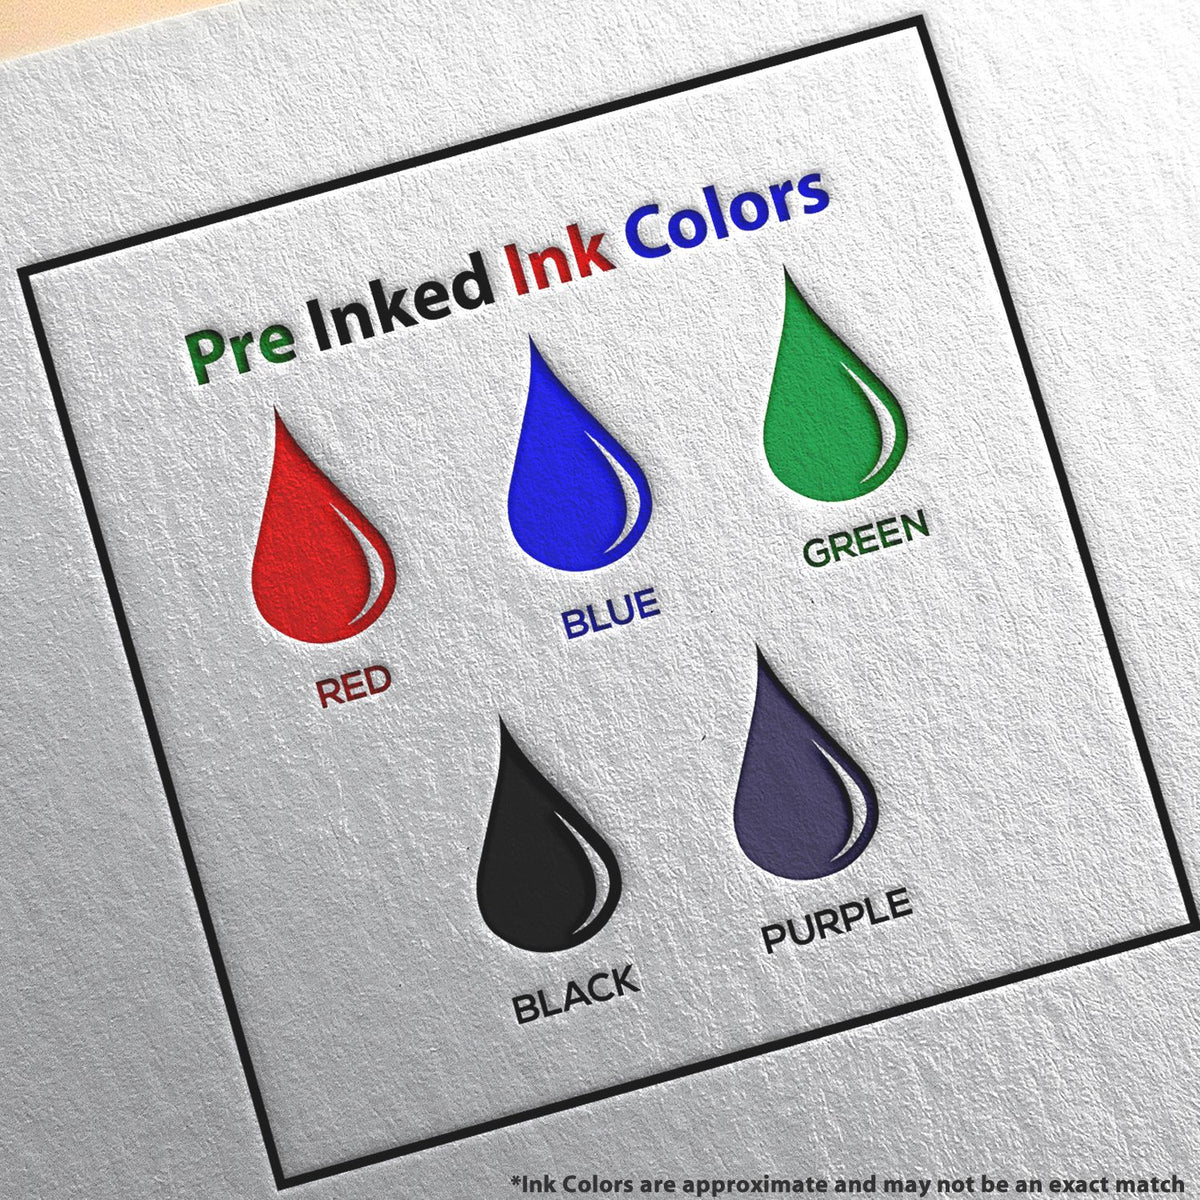 A picture showing the different ink colors or hues available for the PSI New Jersey Notary Stamp product.